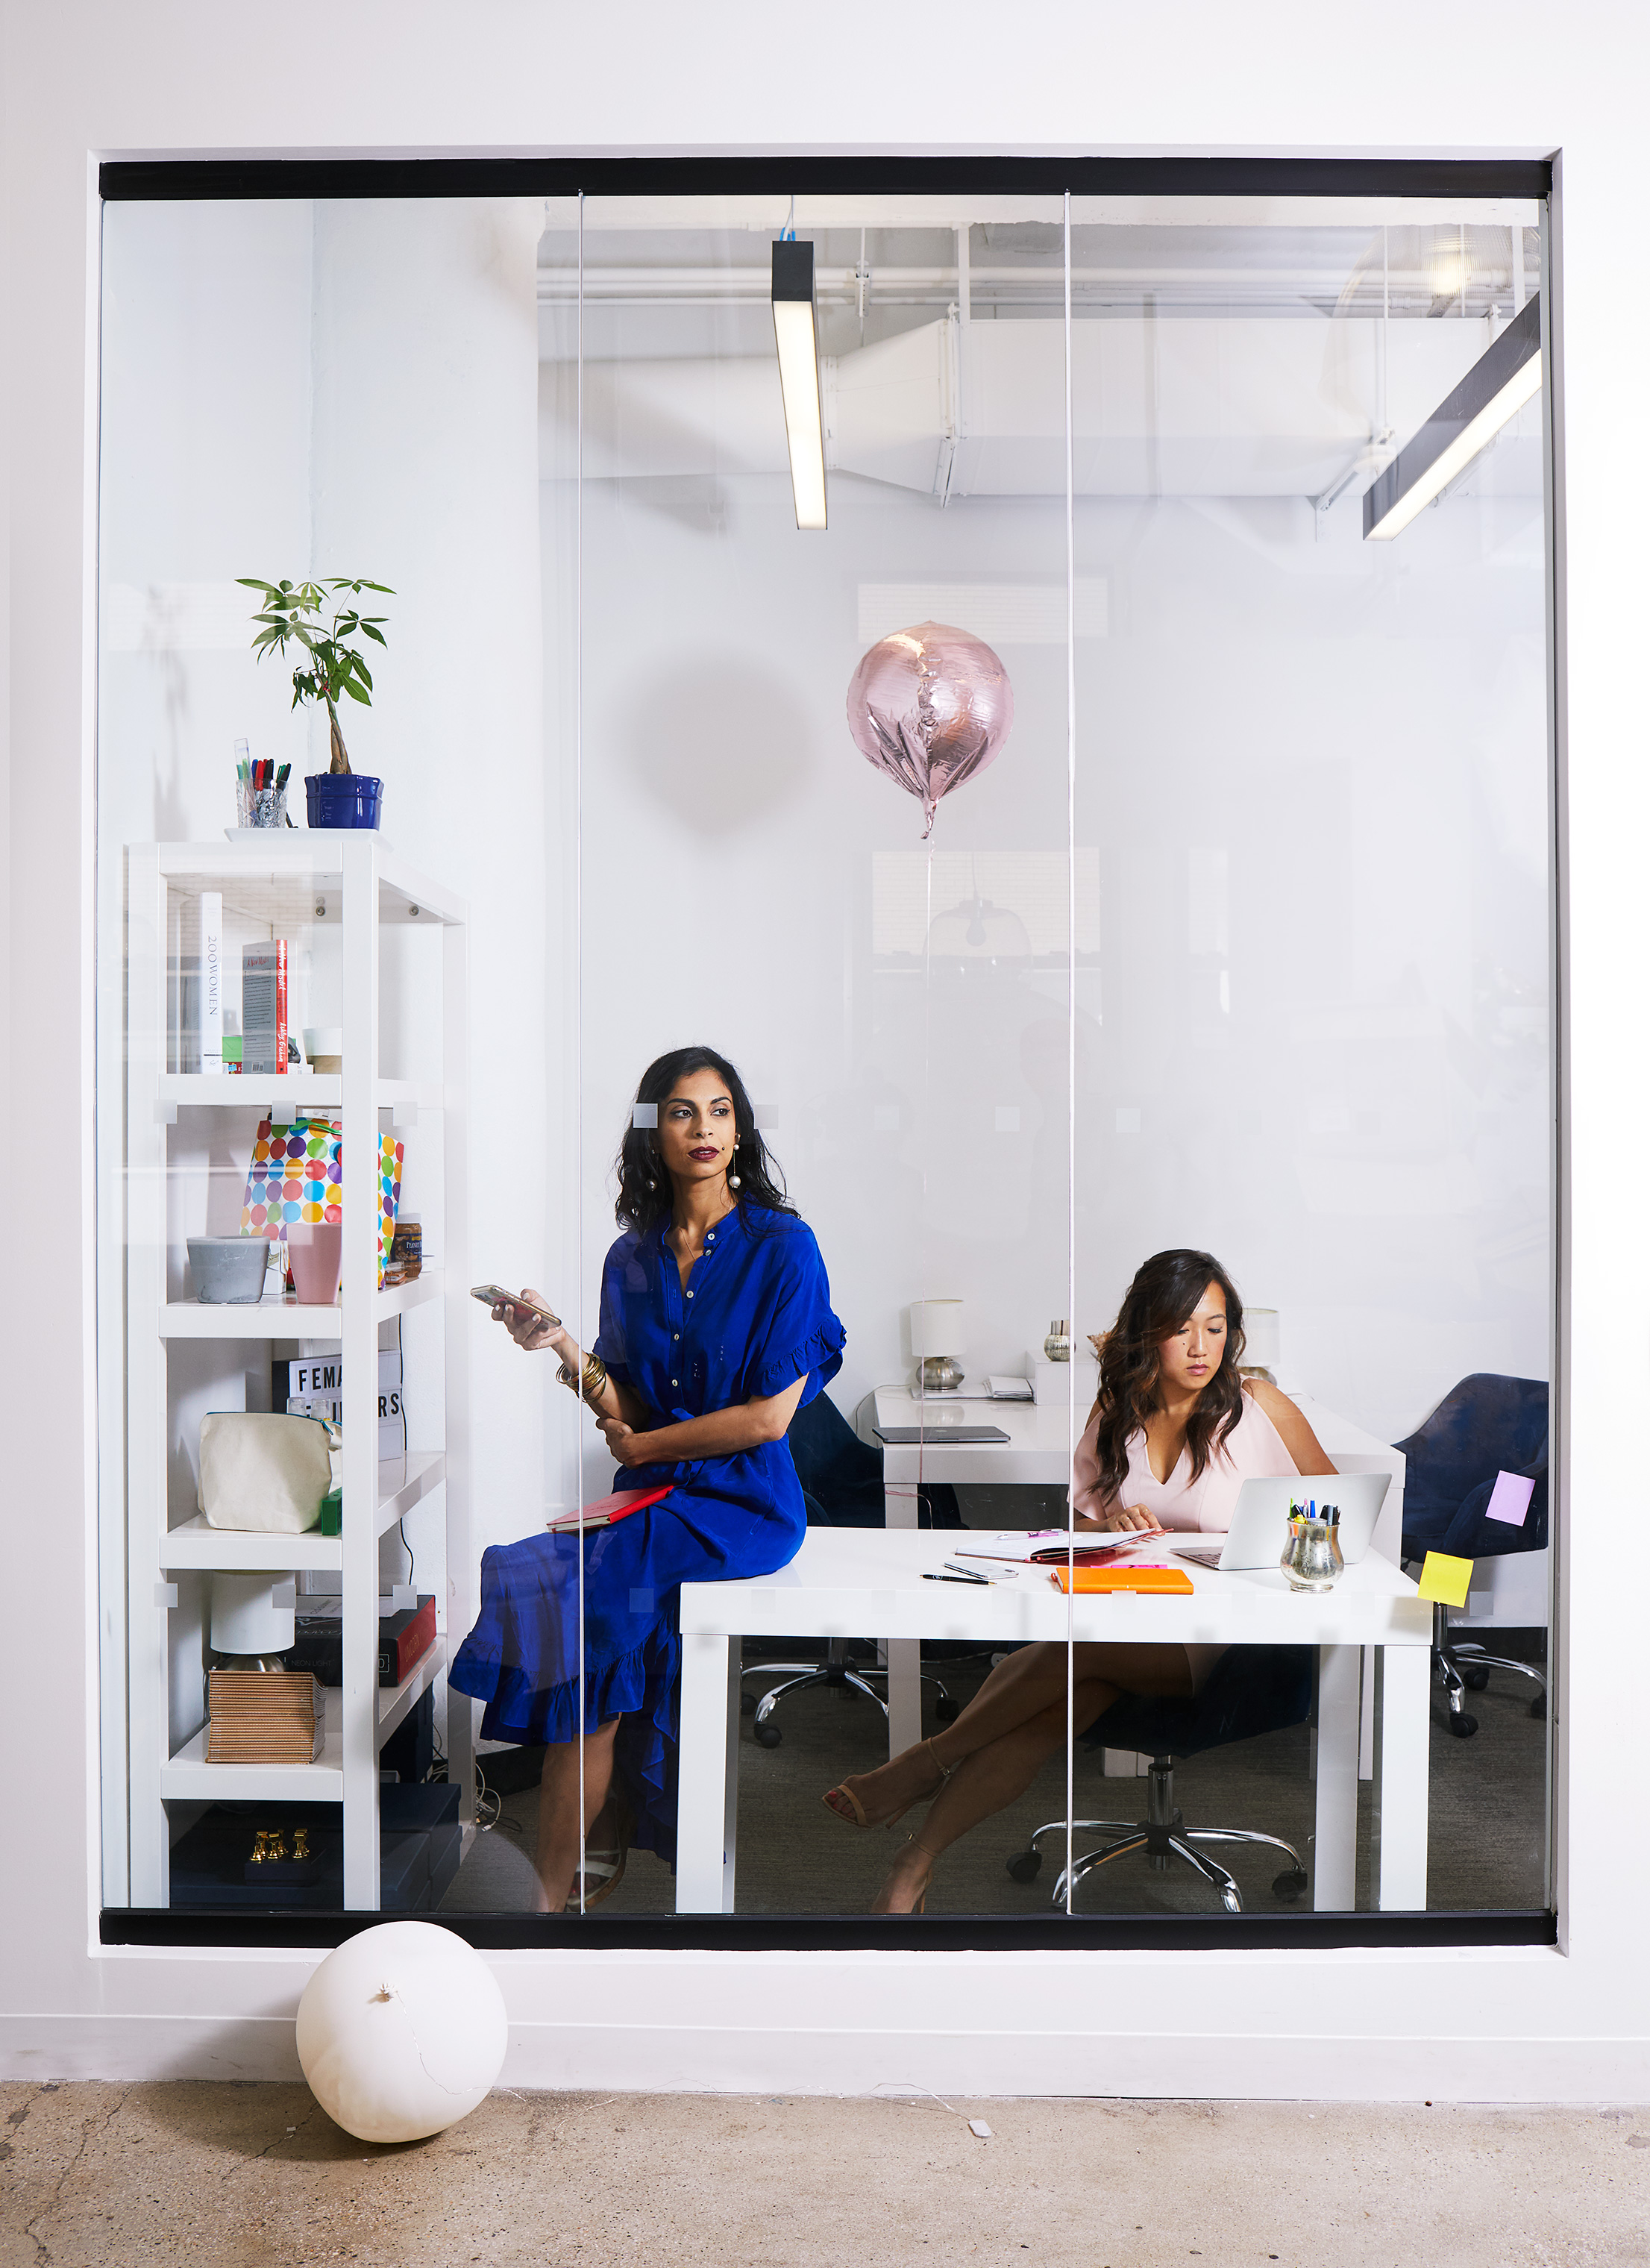 “We’re talking about looking forward and building something new that we want to see,” says Sutian Dong (right), with Female Founders Fund partner Anu Duggal, "versus existing in a system and a construct that’s designed for people that don’t look like us.” (Kyoko Hamada for TIME)